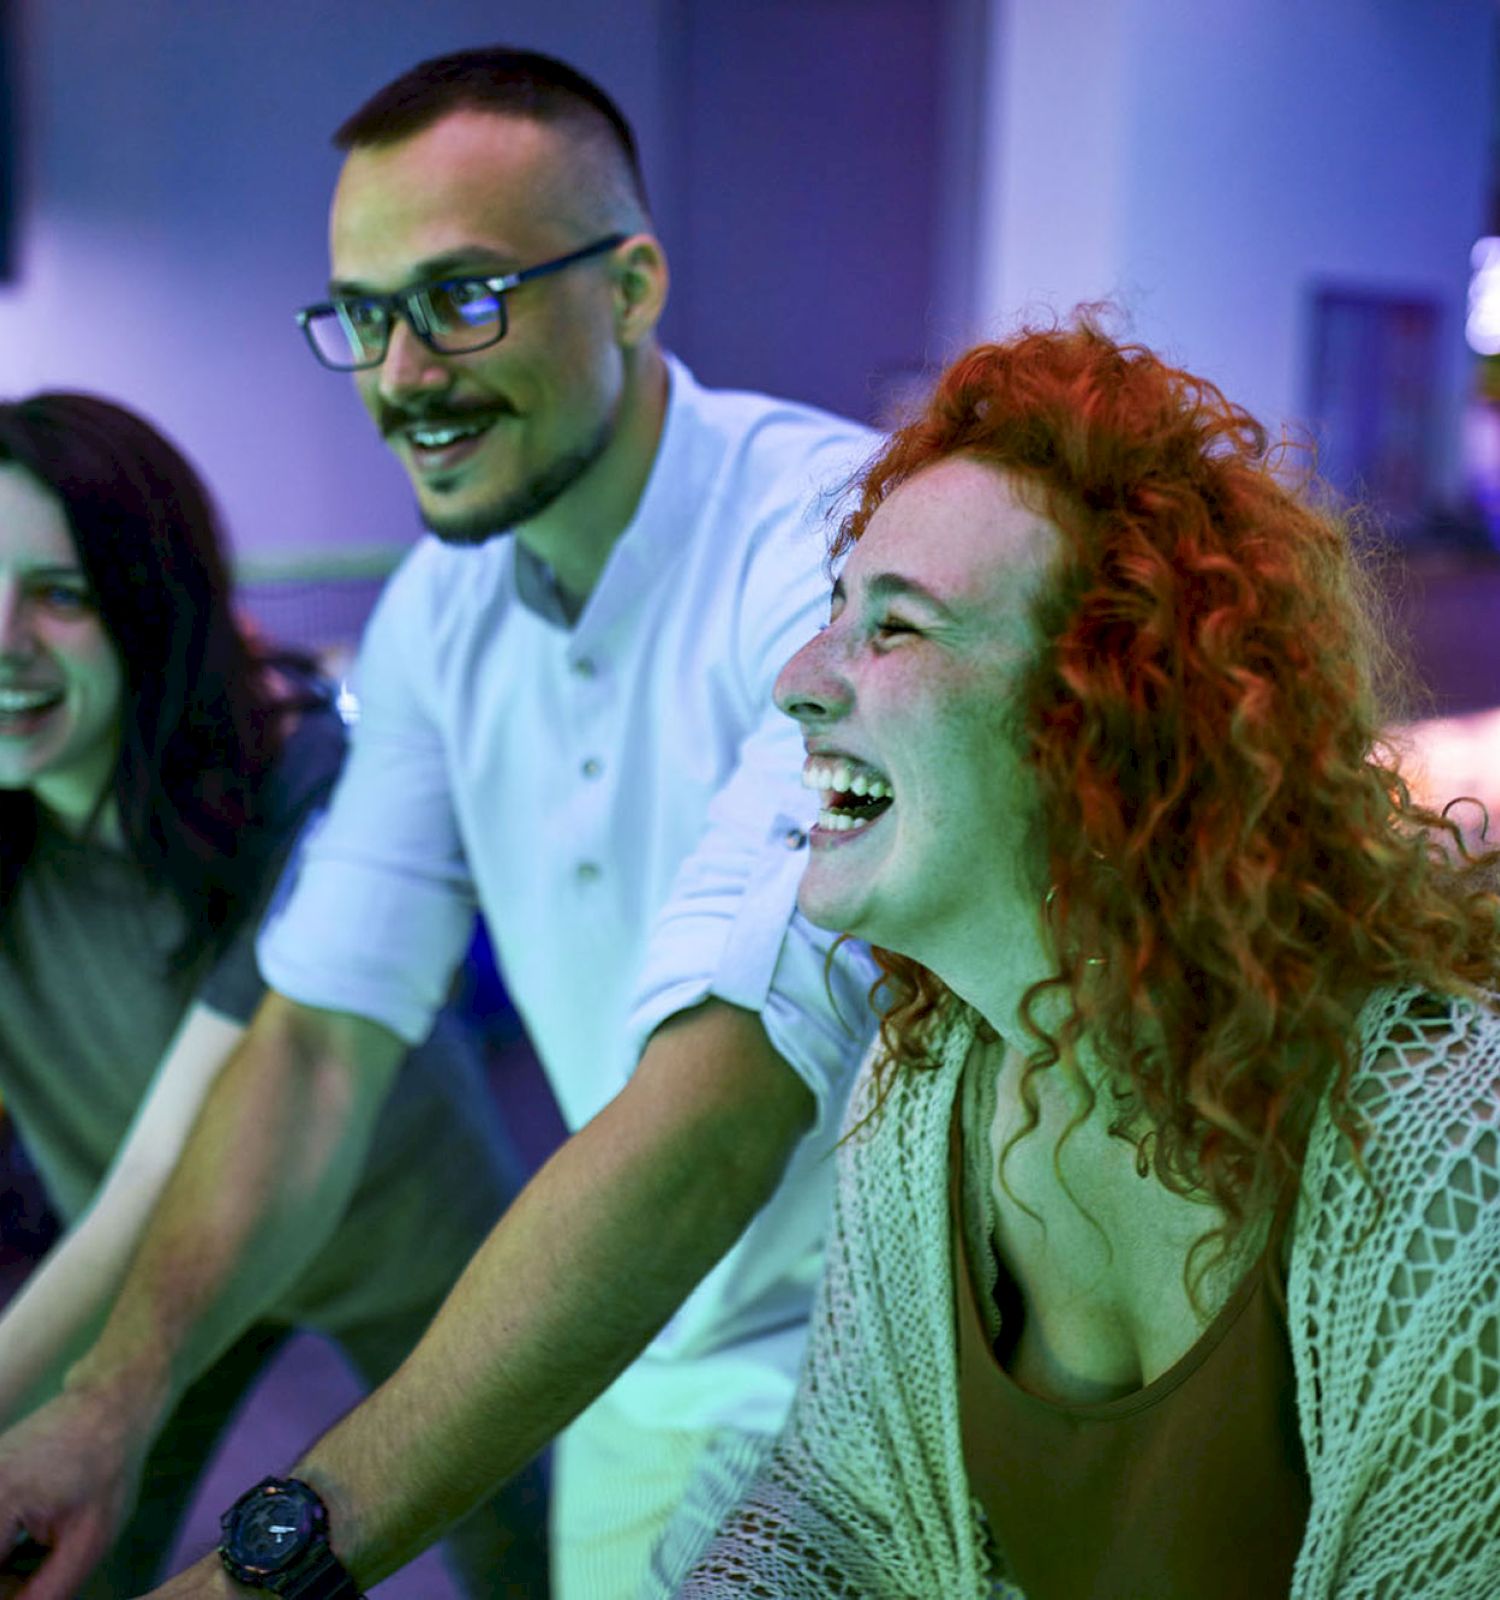 A group of four friends is enjoying playing arcade games, smiling and laughing together in a brightly lit gaming area at night.